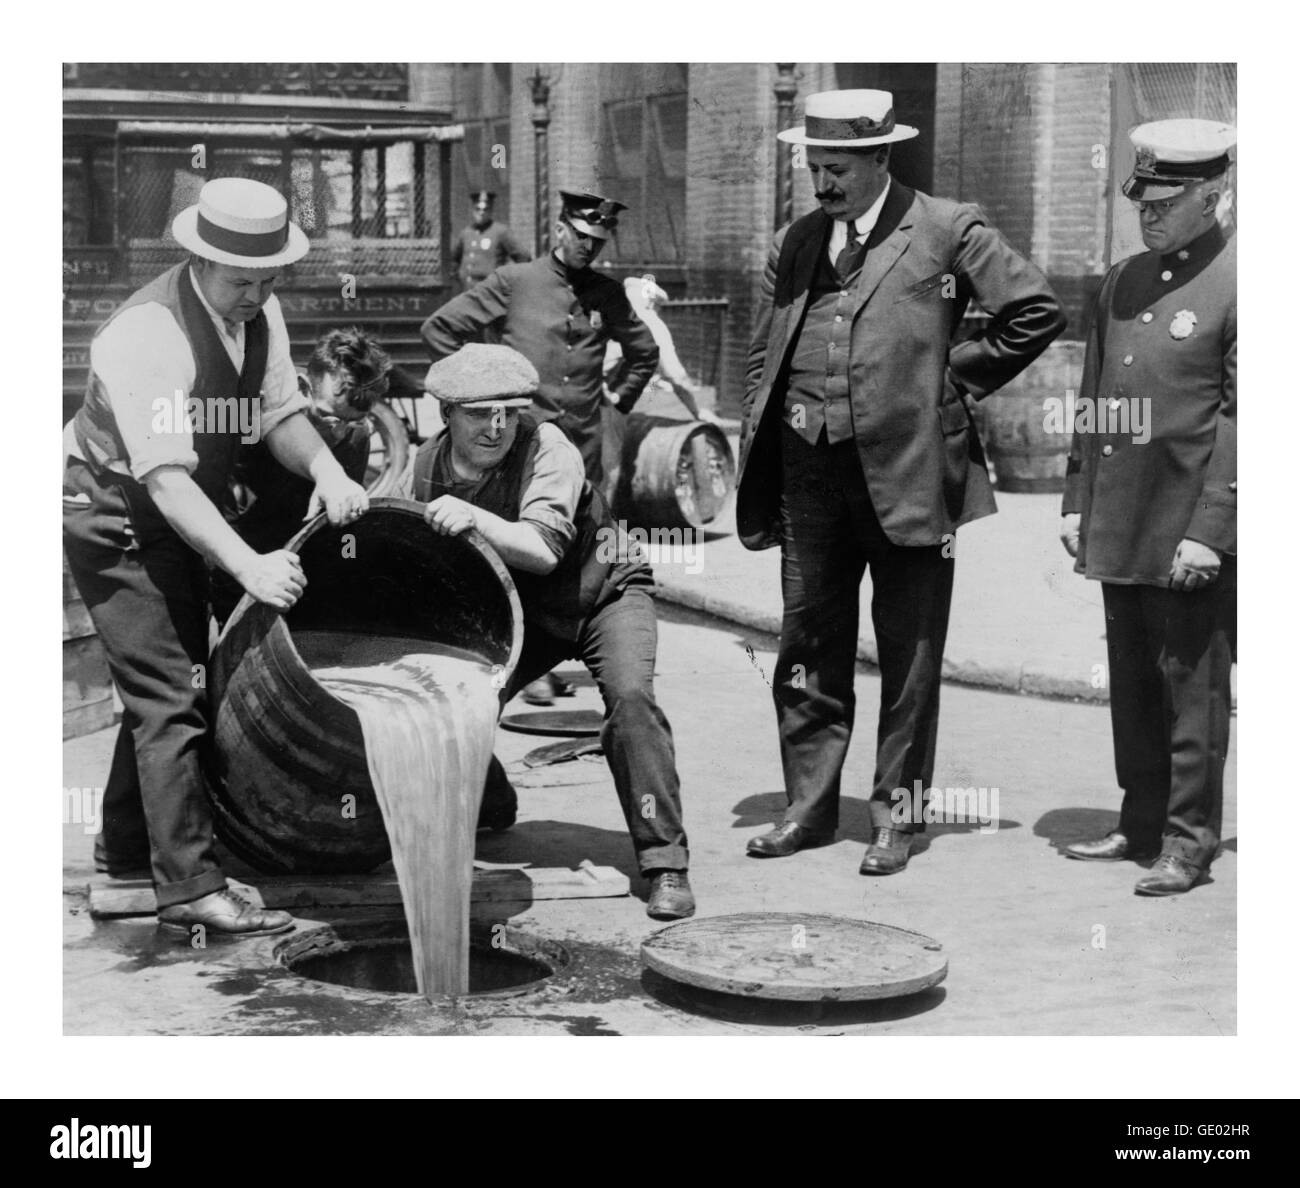 PROHIBITION Alcohol is being poured out of a barrel down the sewers, monitored by the police and federal officers, during American 1919 prohibition laws and bootlegging days in the USA Stock Photo